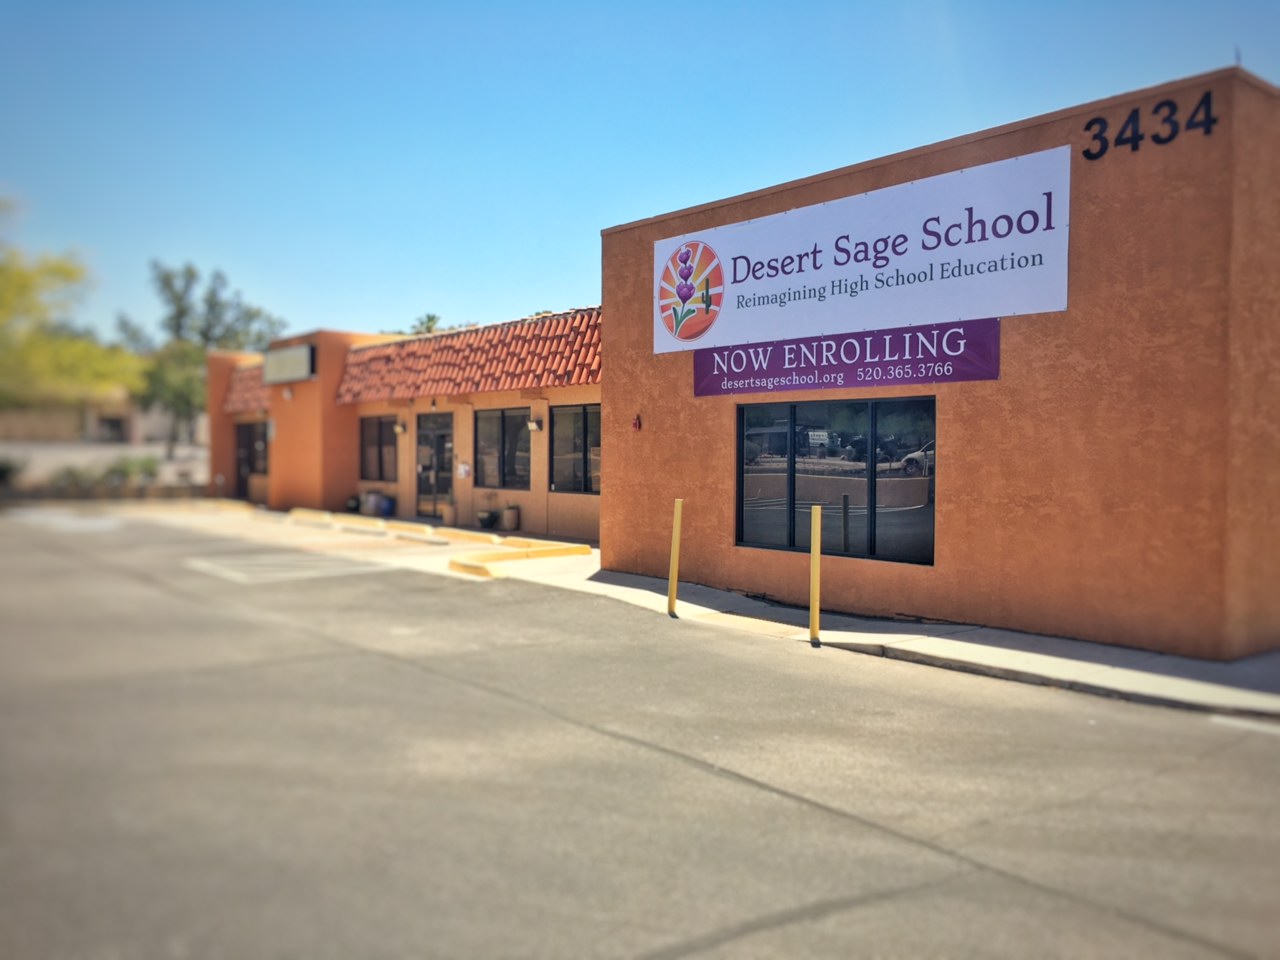 Desert Sage school in Arizona from the outside